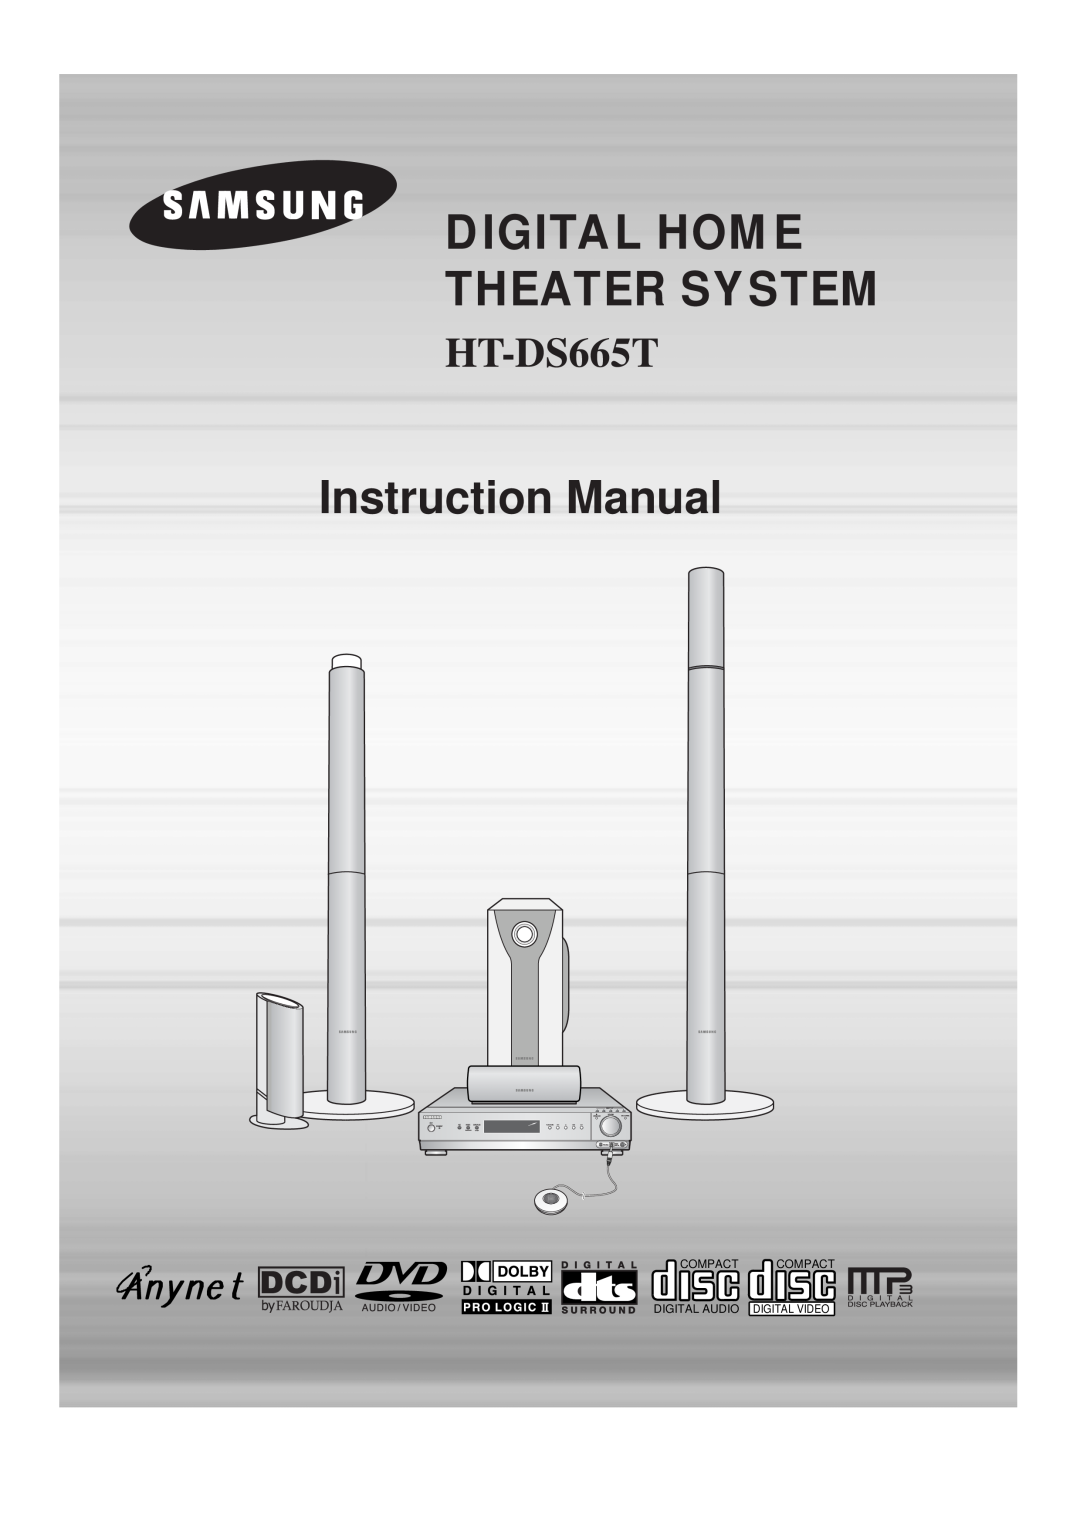 Samsung 20051111115925328, AH68-01493X instruction manual Digital Home Theater System, Instruction Manual, HT-DS665T 